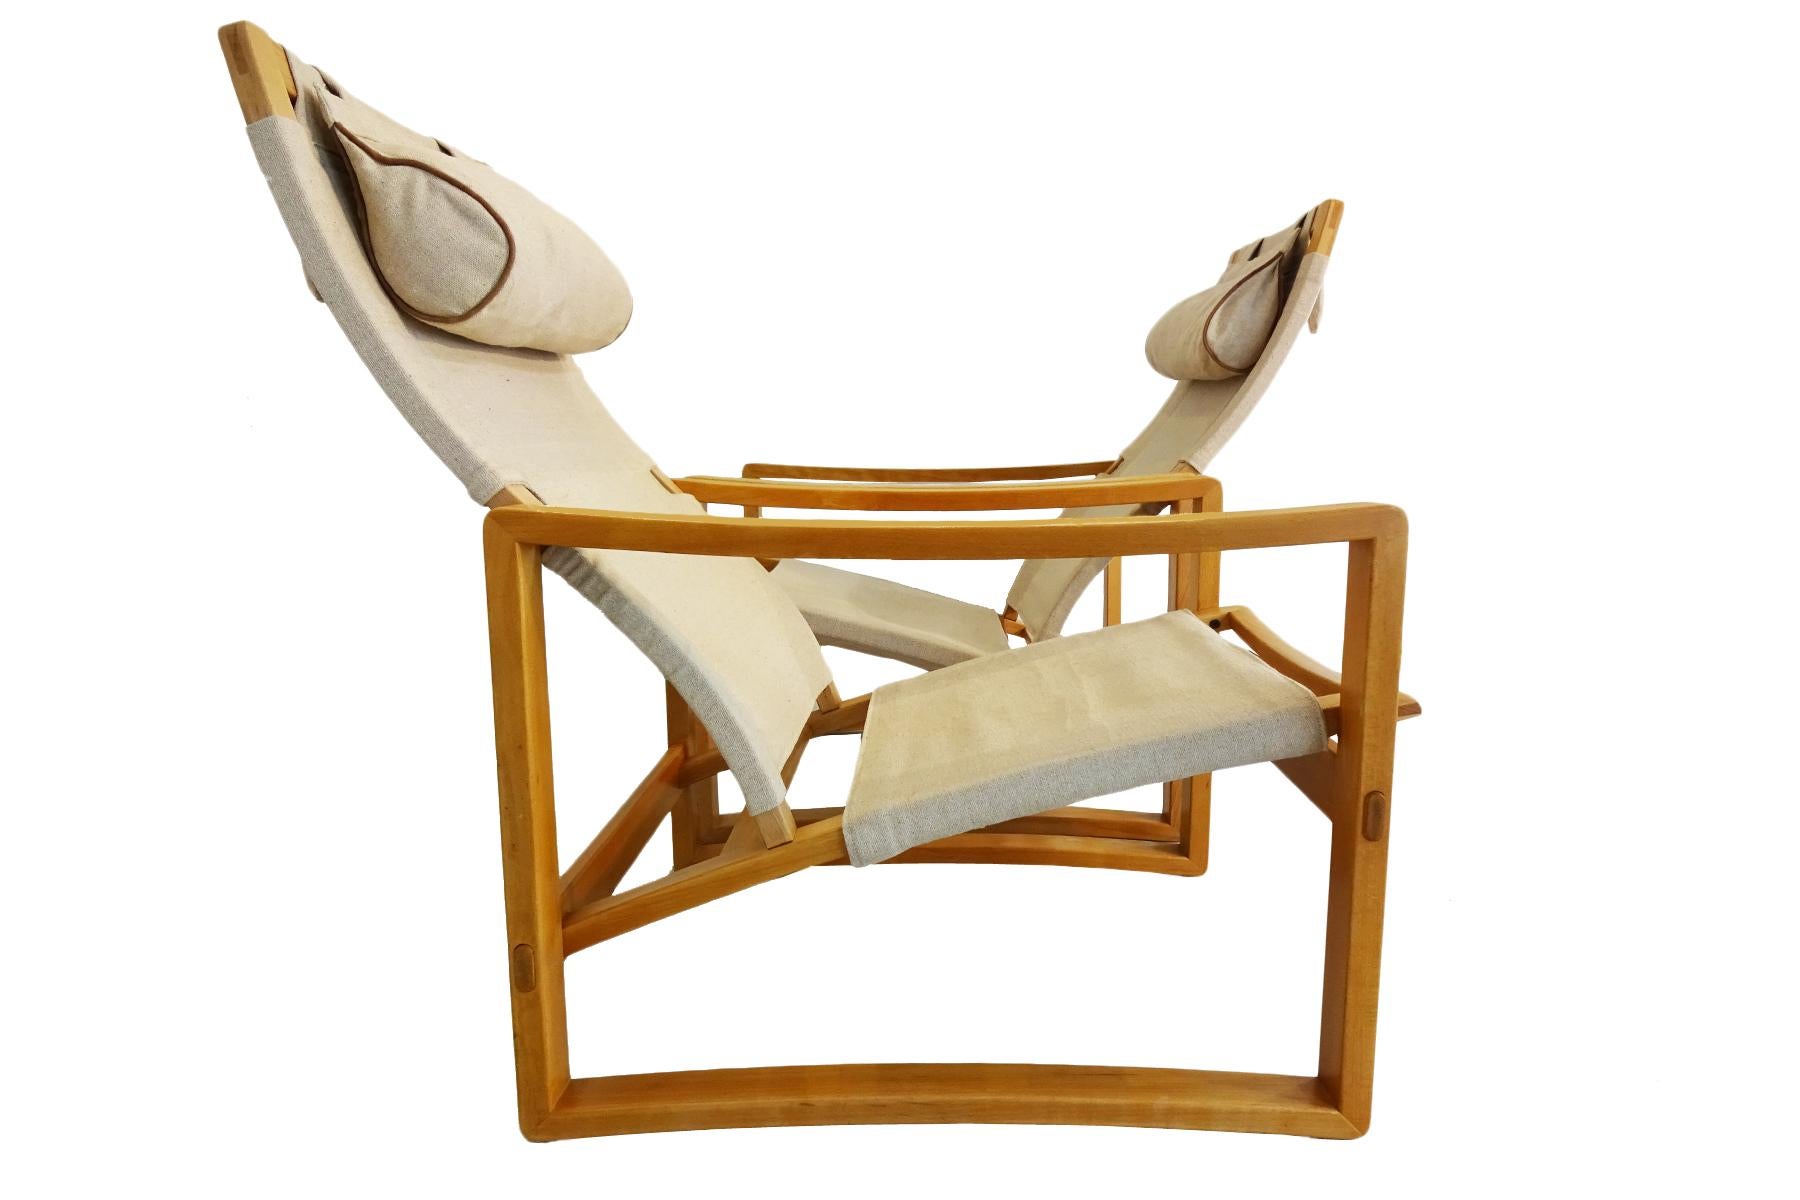 Lounge Chairs -  Safari style Danish Midcentury chairs by Børge Jensen & Sønner In Good Condition For Sale In Highclere, Newbury